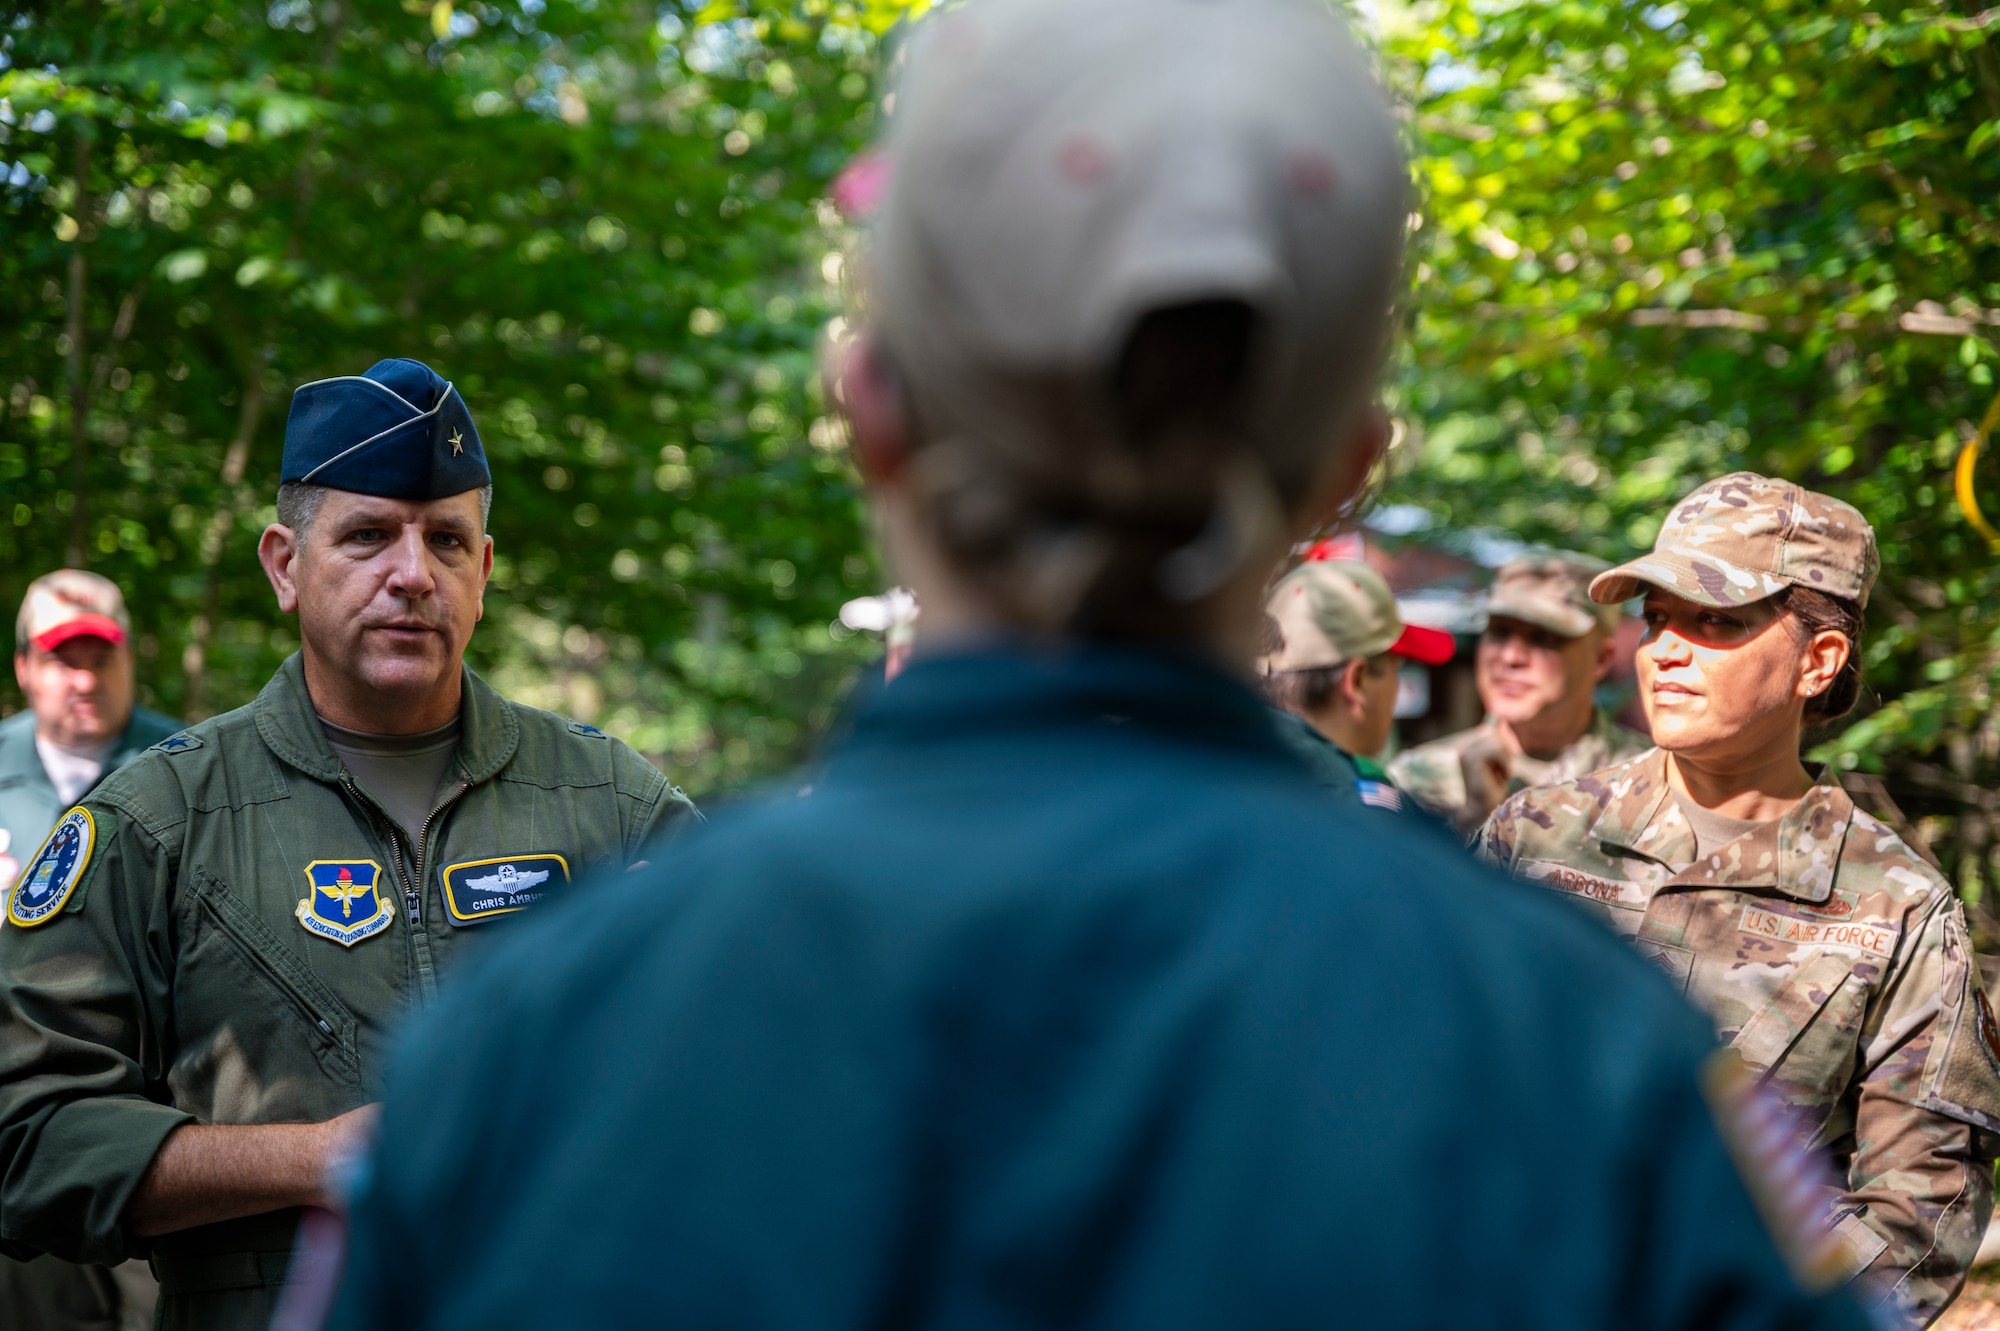 U.S. Air Force Brig. Gen. Christopher Amrhein (left), Air Force Recruiting Service commander, and Chief Master Sgt. Rebecca Arbona, AFRS command chief, speak to Boy Scouts of America staff and camp counselors at Camp Minsi in Pocono Summit, Penn., July 22, 2023.